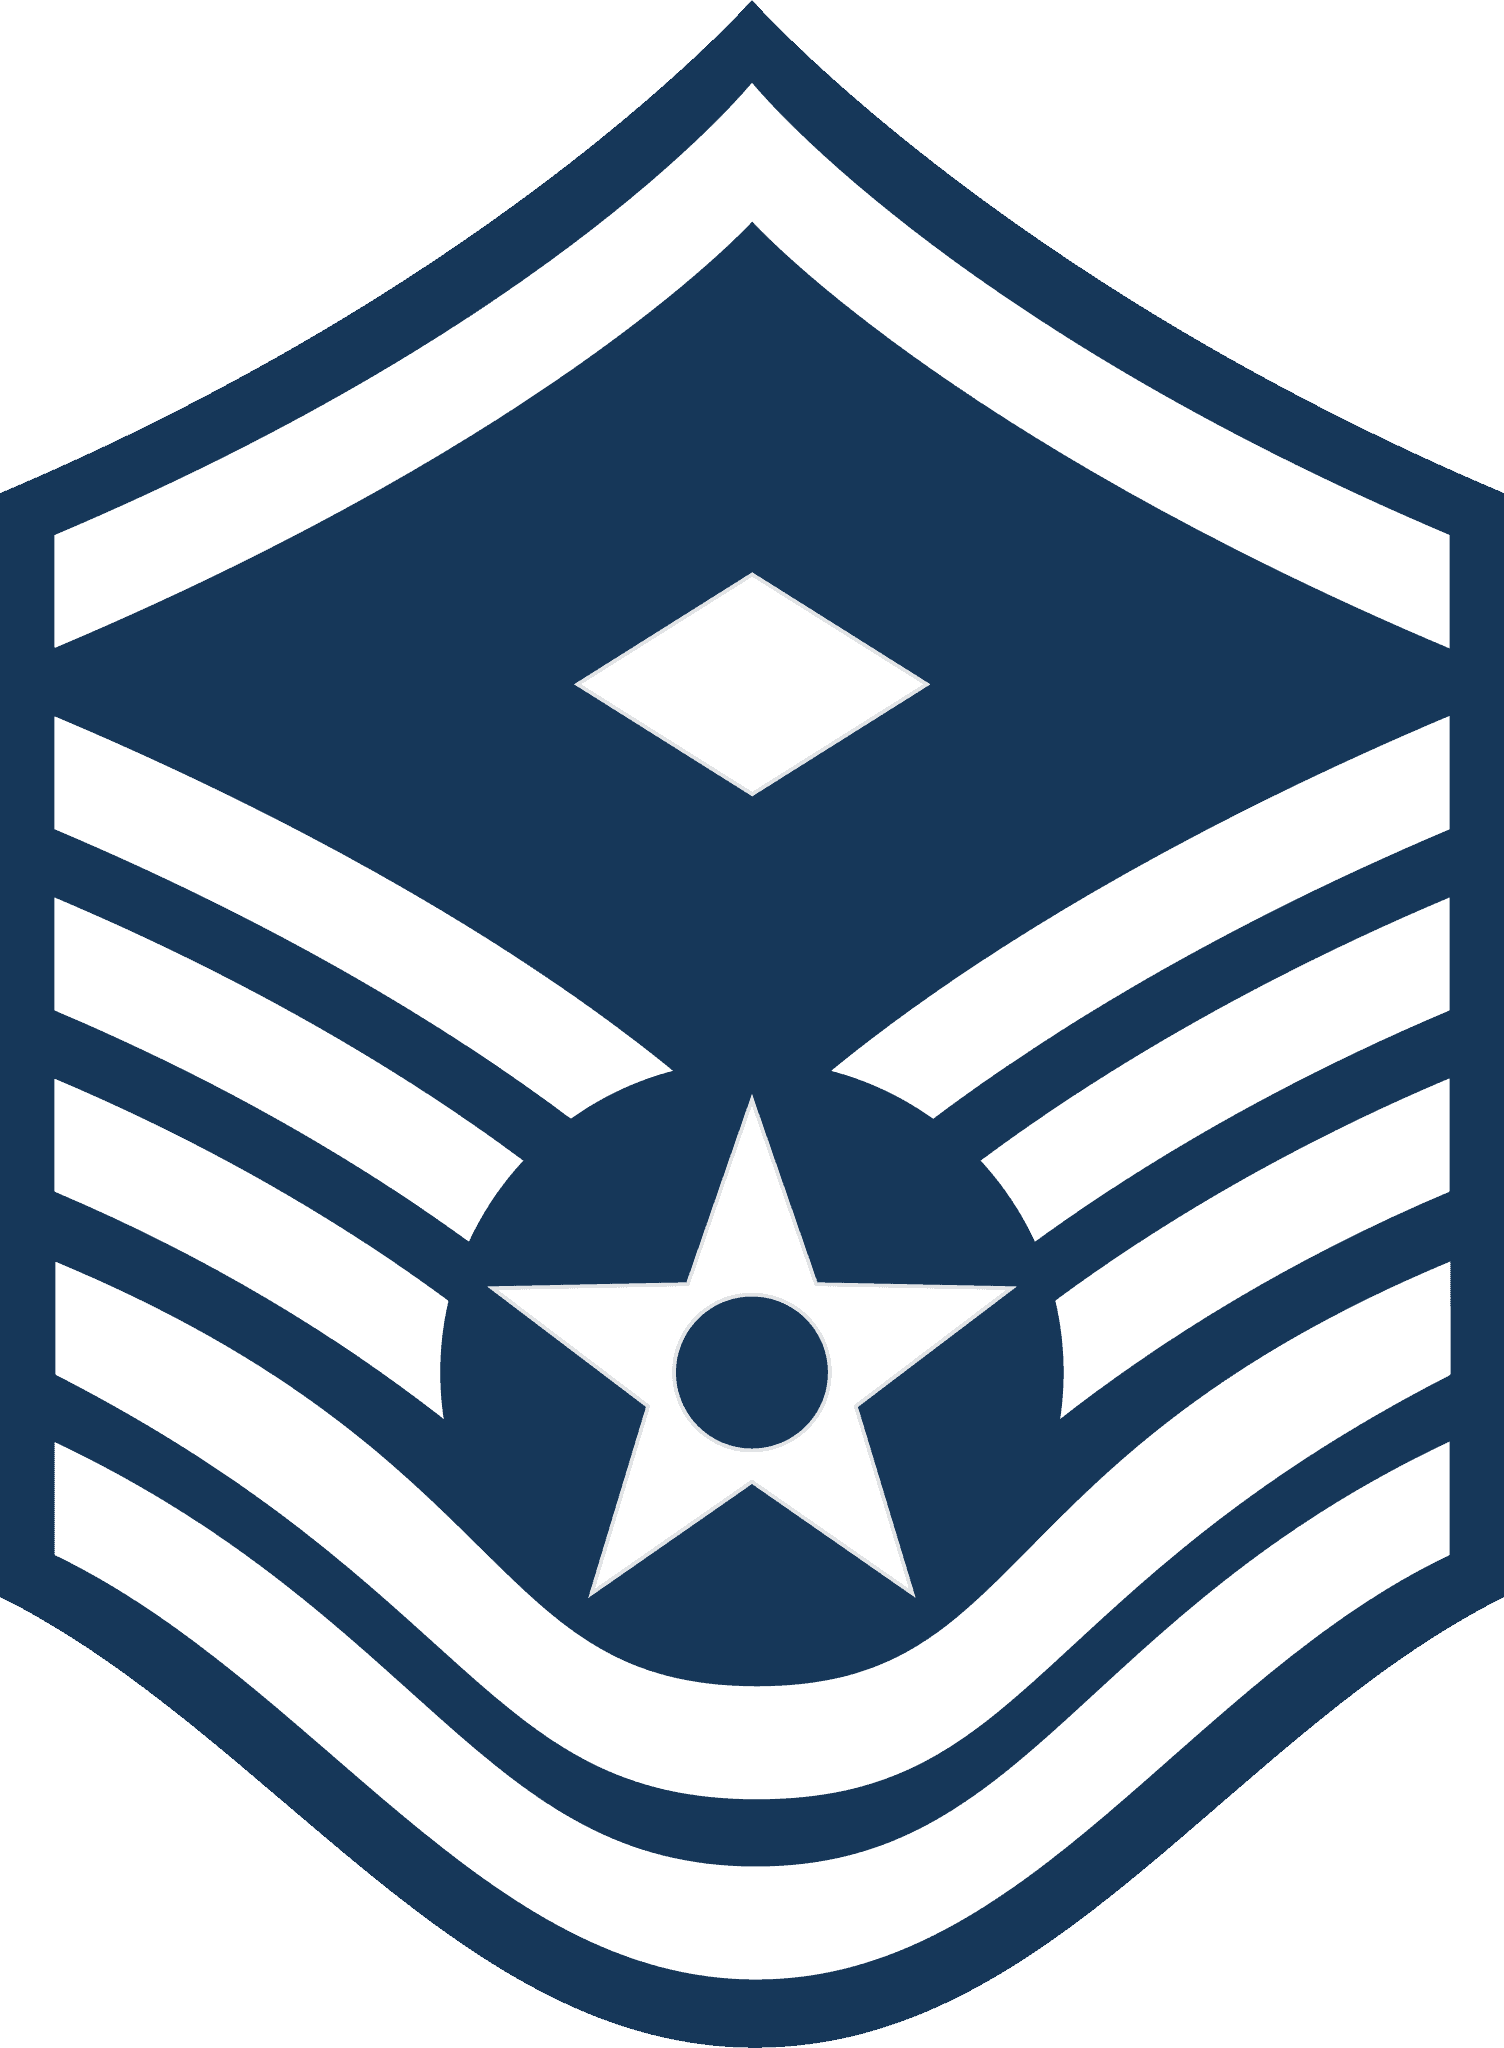 <p>Master sergeants in the Air Force will be called to serve as section chiefs, flight chiefs, or superintendents. Earnings at this rank range between $43,499 and $78,188 annually. </p><p><span>Would you please let us know what you think about our content? <p>Agree? Tell us by clicking the “Thumbs Up” button above.</p> Disagree? Leave a comment telling us what you’d change.</span></p>